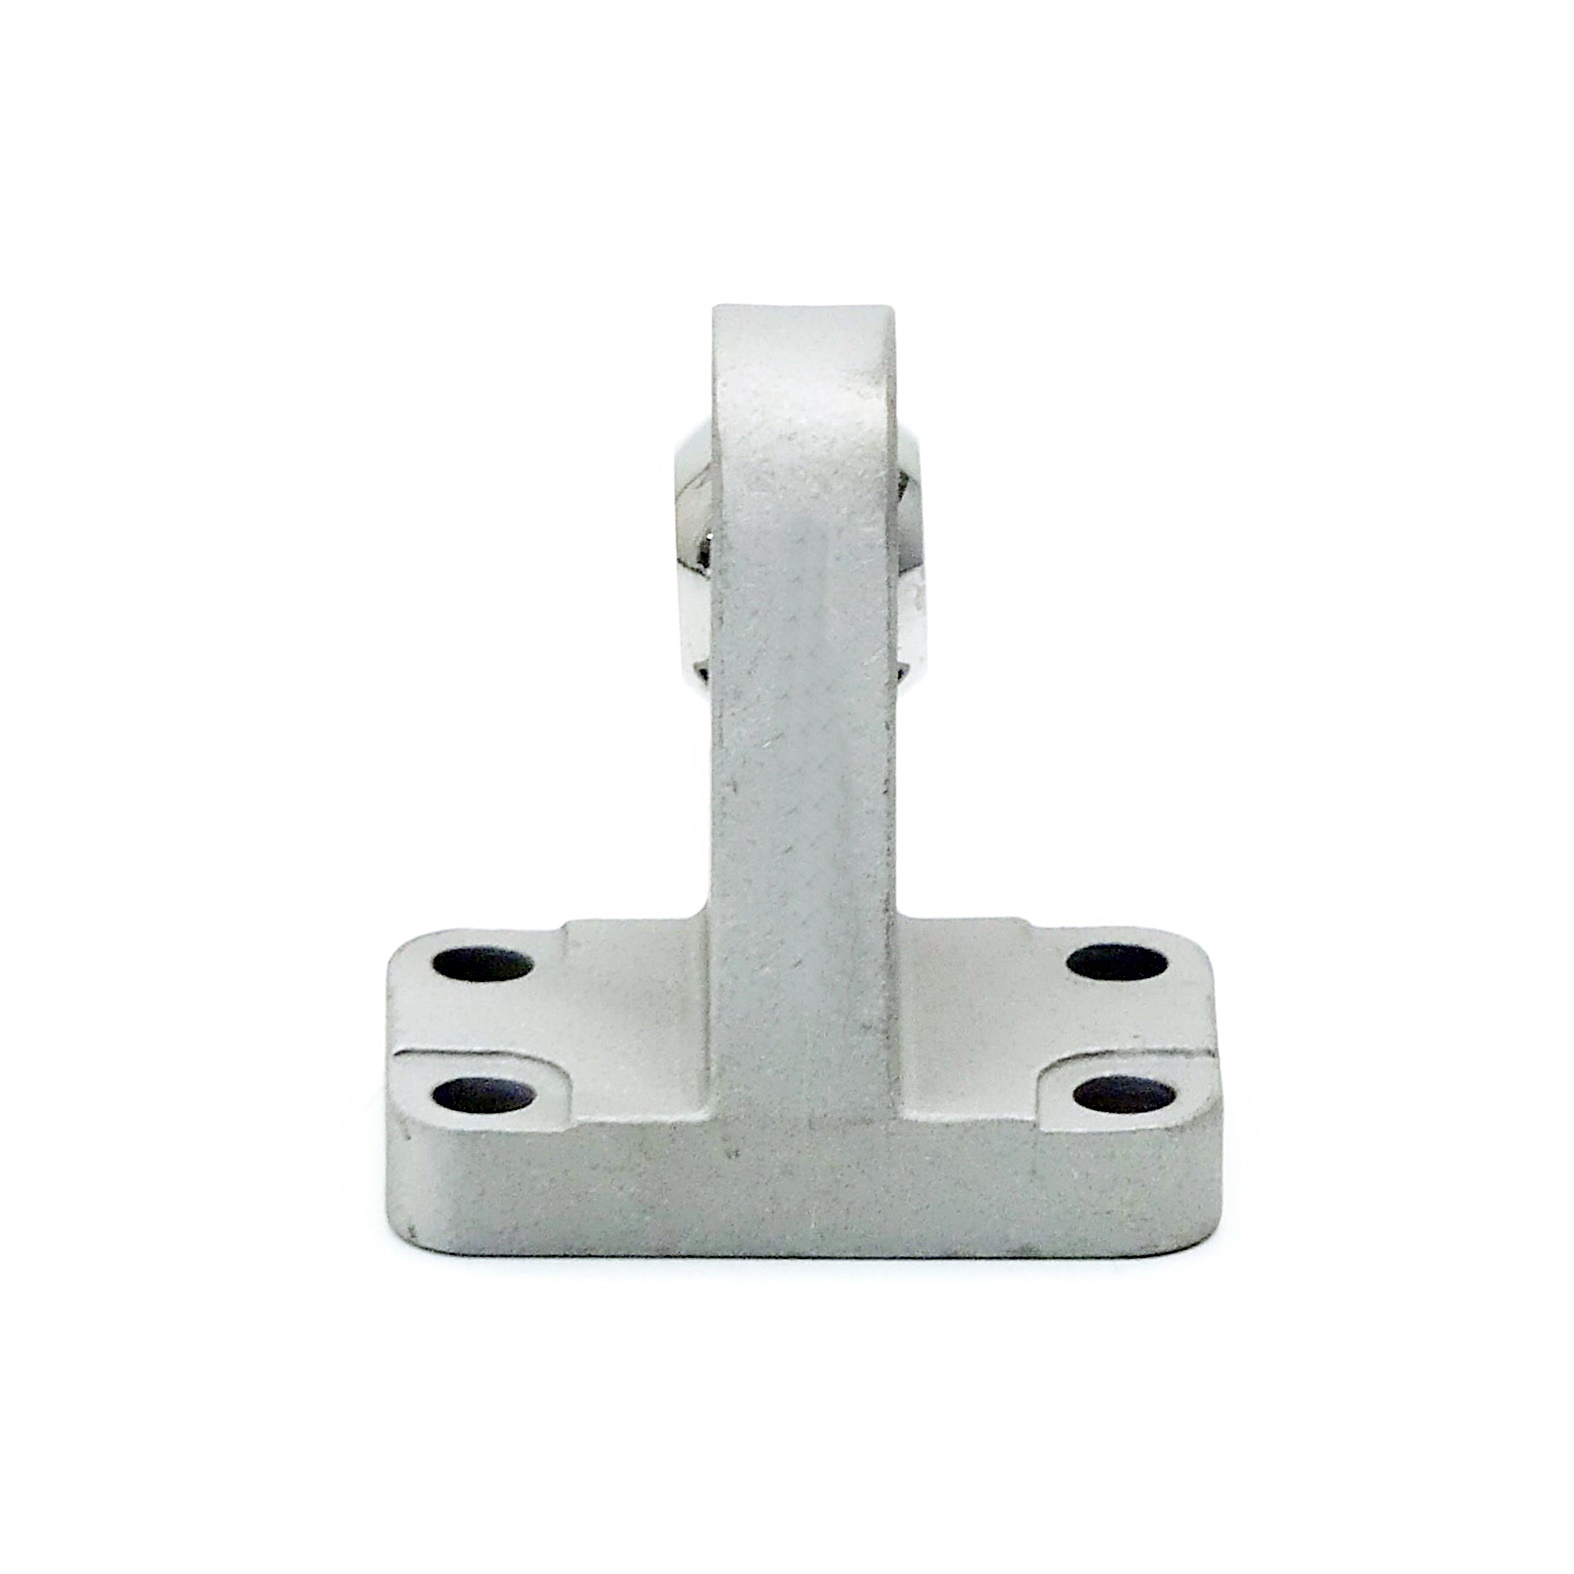 Clevis foot LSNG-40 